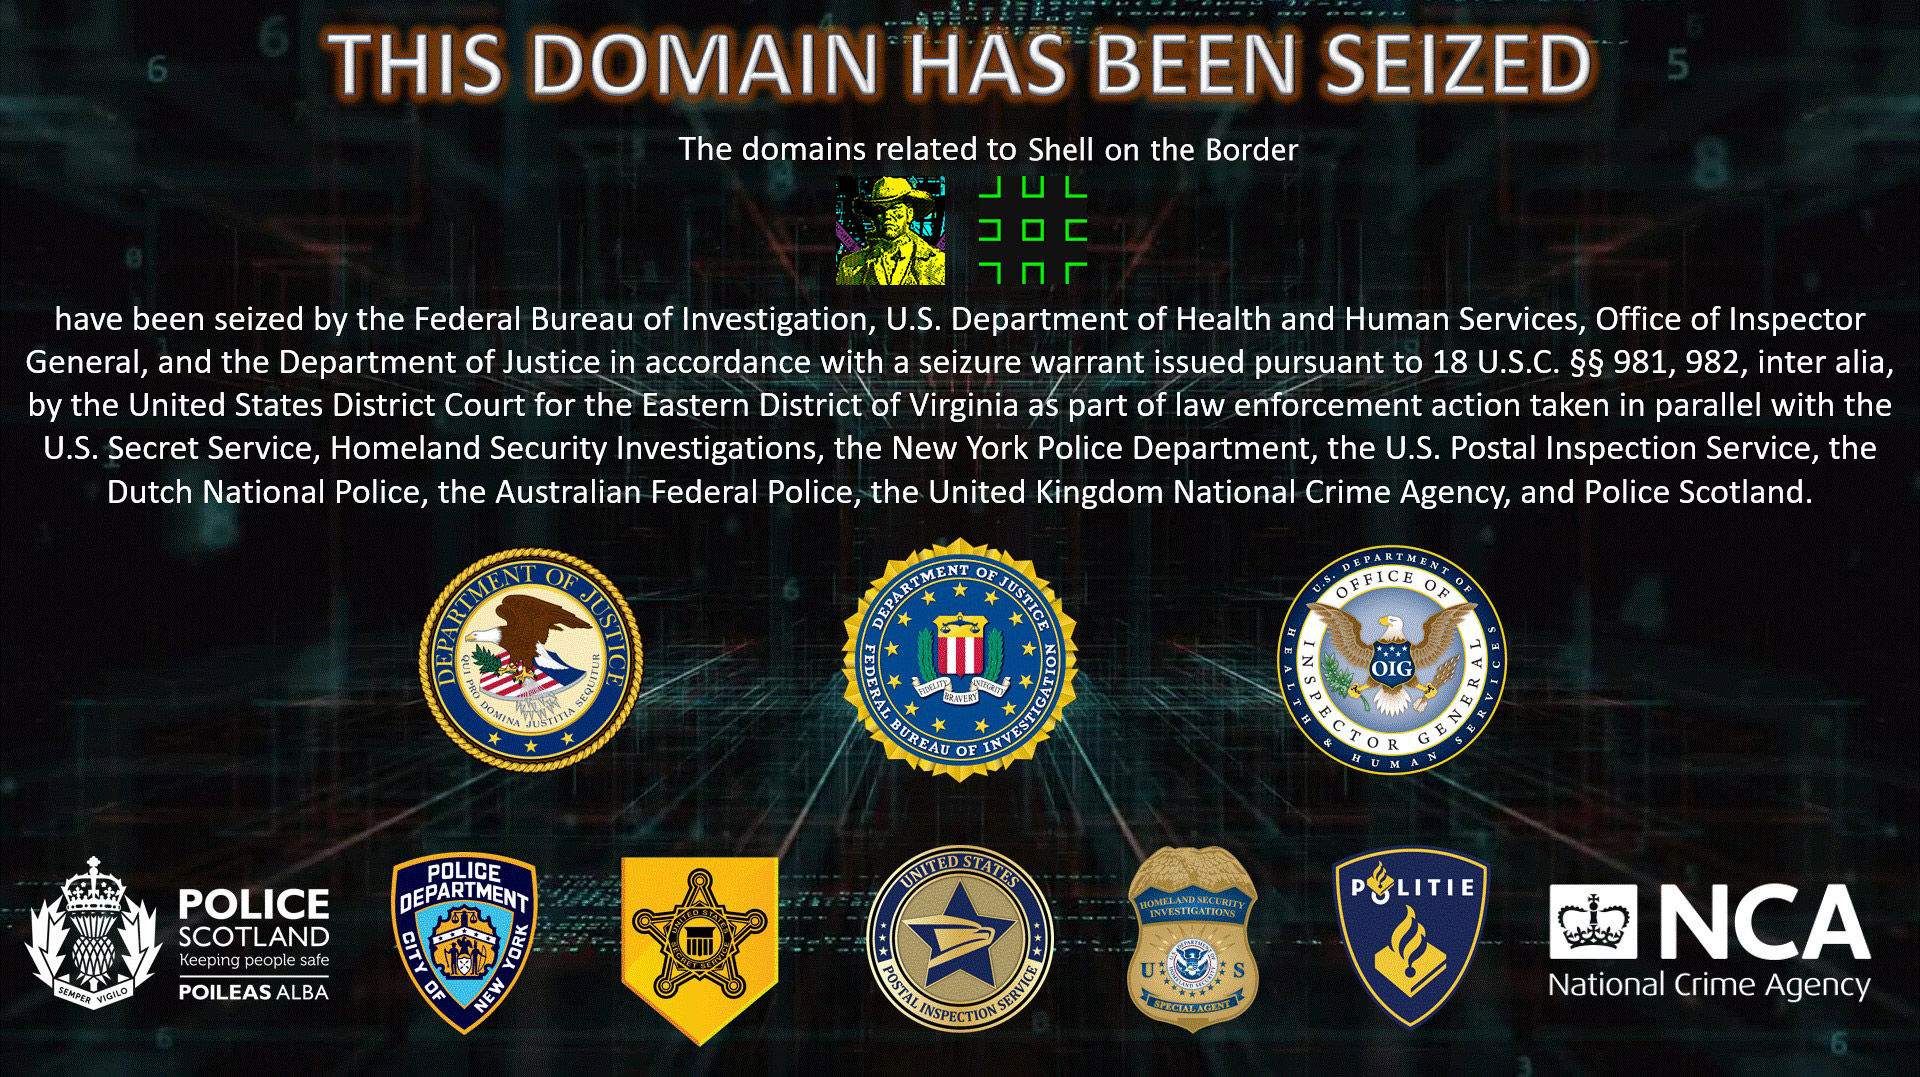 The domains related to Shell on the Border have been seized by the Federal Bureau of Investigation, U.S. Department of Health and Human Services, Office of Inspector General, and the Department of Justice in accordance with a seizure warrant issued pursuant to 18 U.S.C. §§ 981, 982, inter alia, by the United States District Court for the Eastern District of Virginia as part of law enforcement action taken in parallel with the United States Secret Service, Homeland Security Investigations, the New York Police Department, the U.S. Postal Inspection Service, the Dutch National Police, the Australian Federal Police, the United Kingdom National Crime Agency, and Police Scotland.